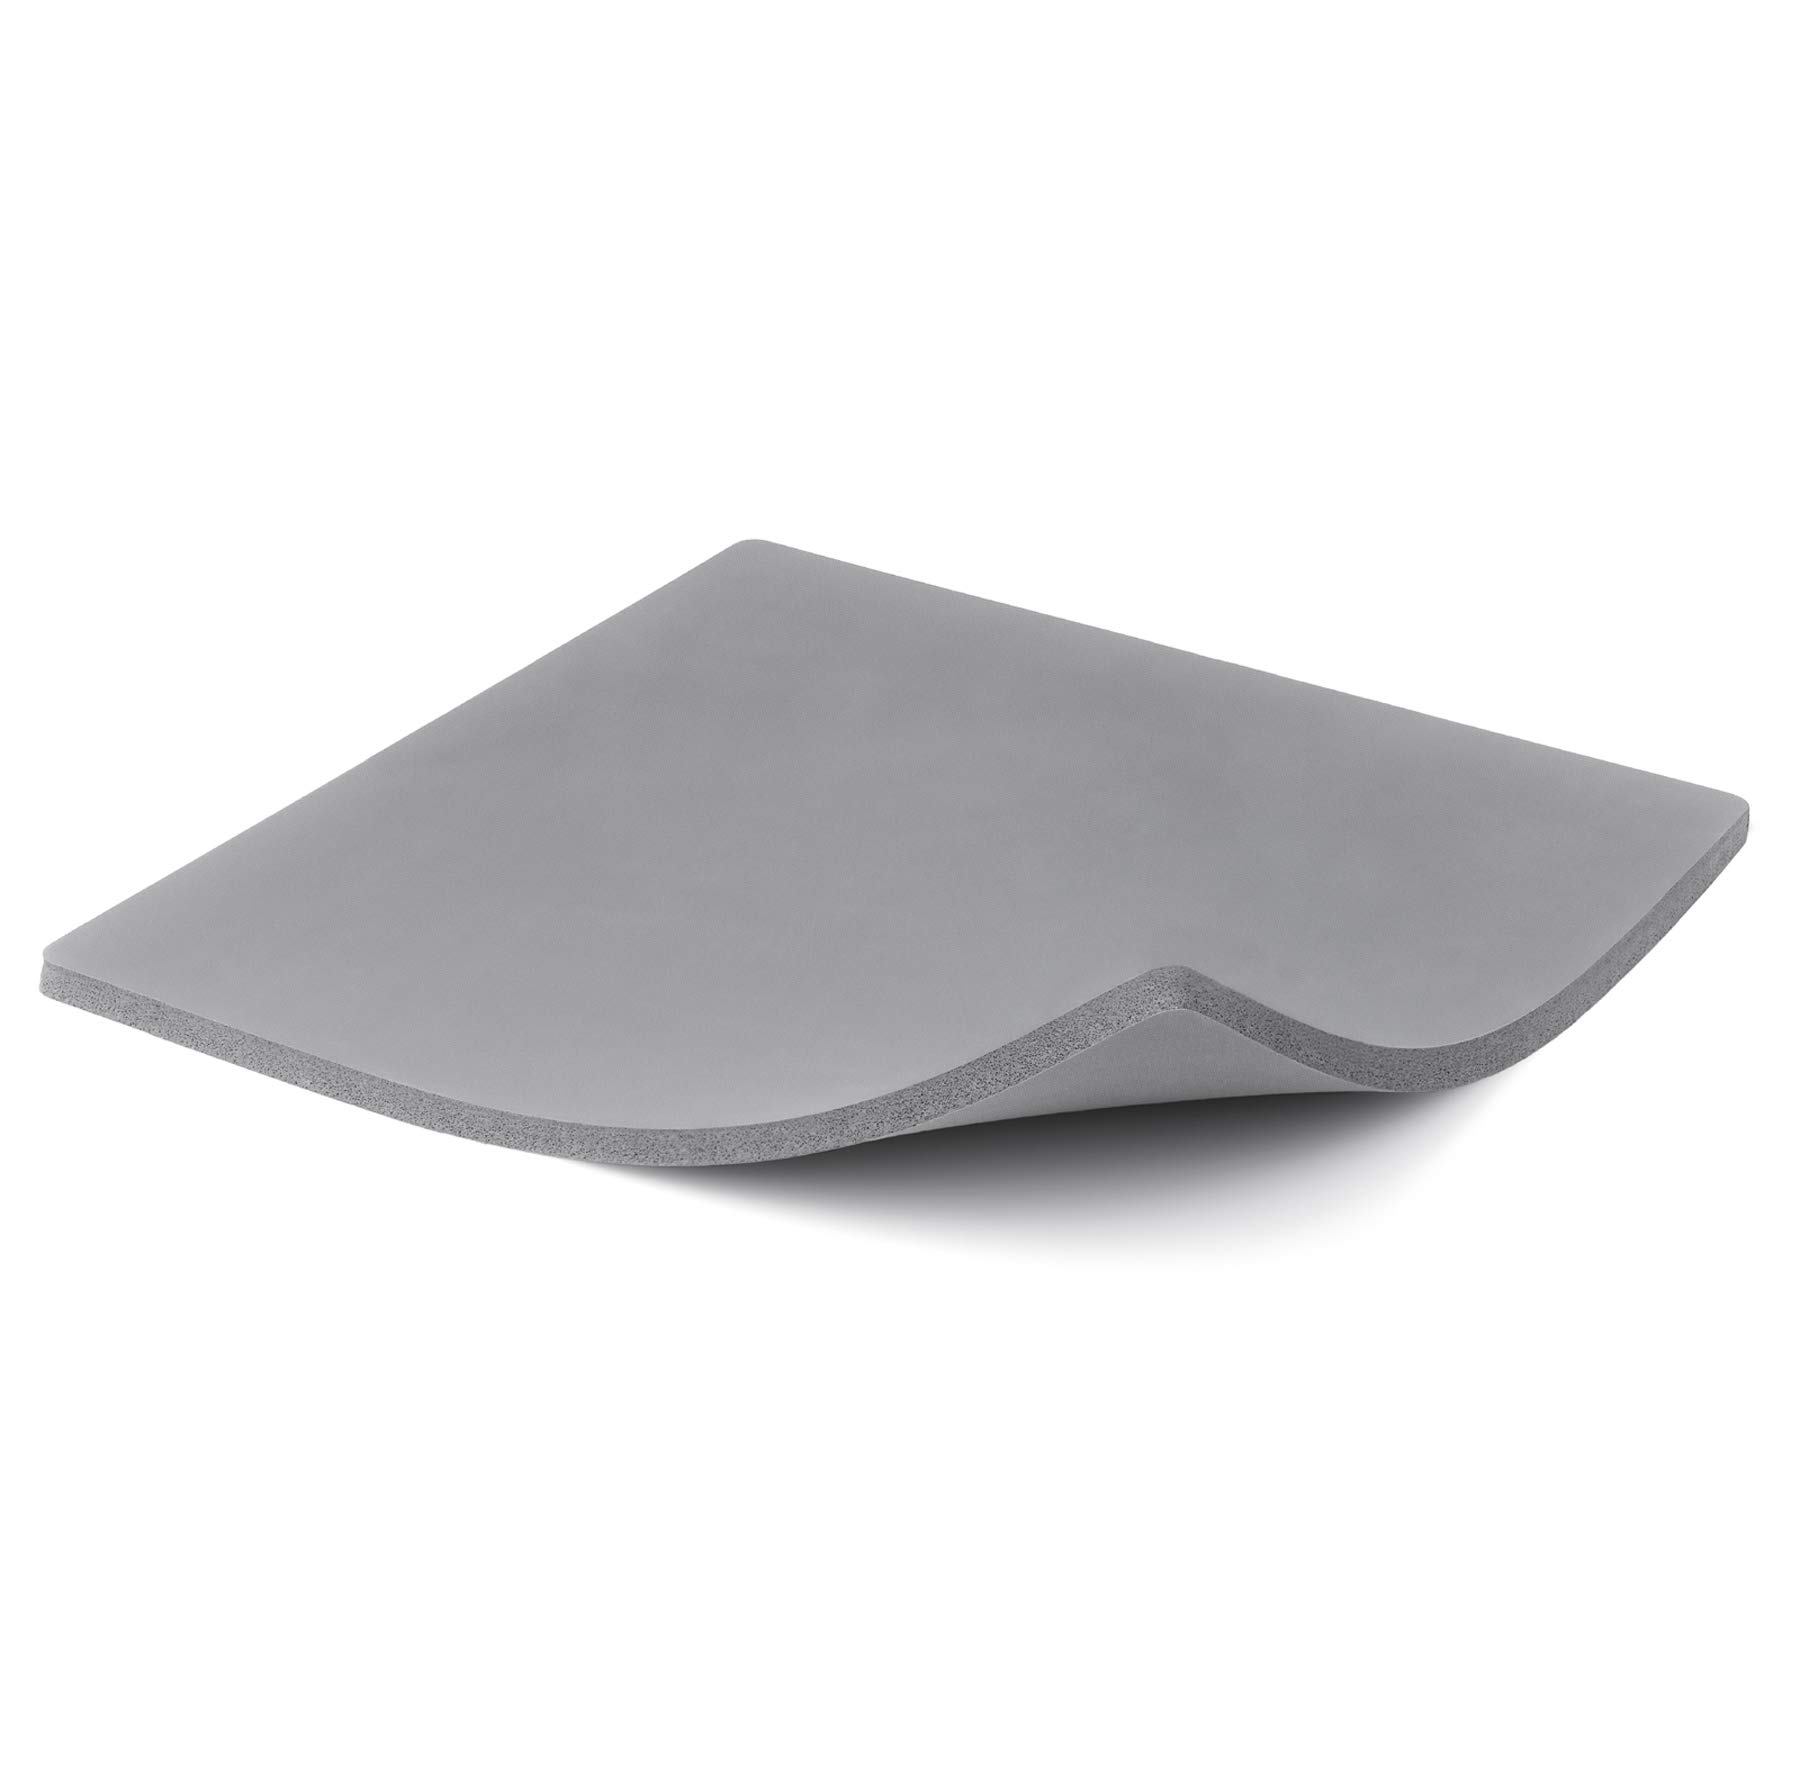 Replacement Heat Press Silicone Pad